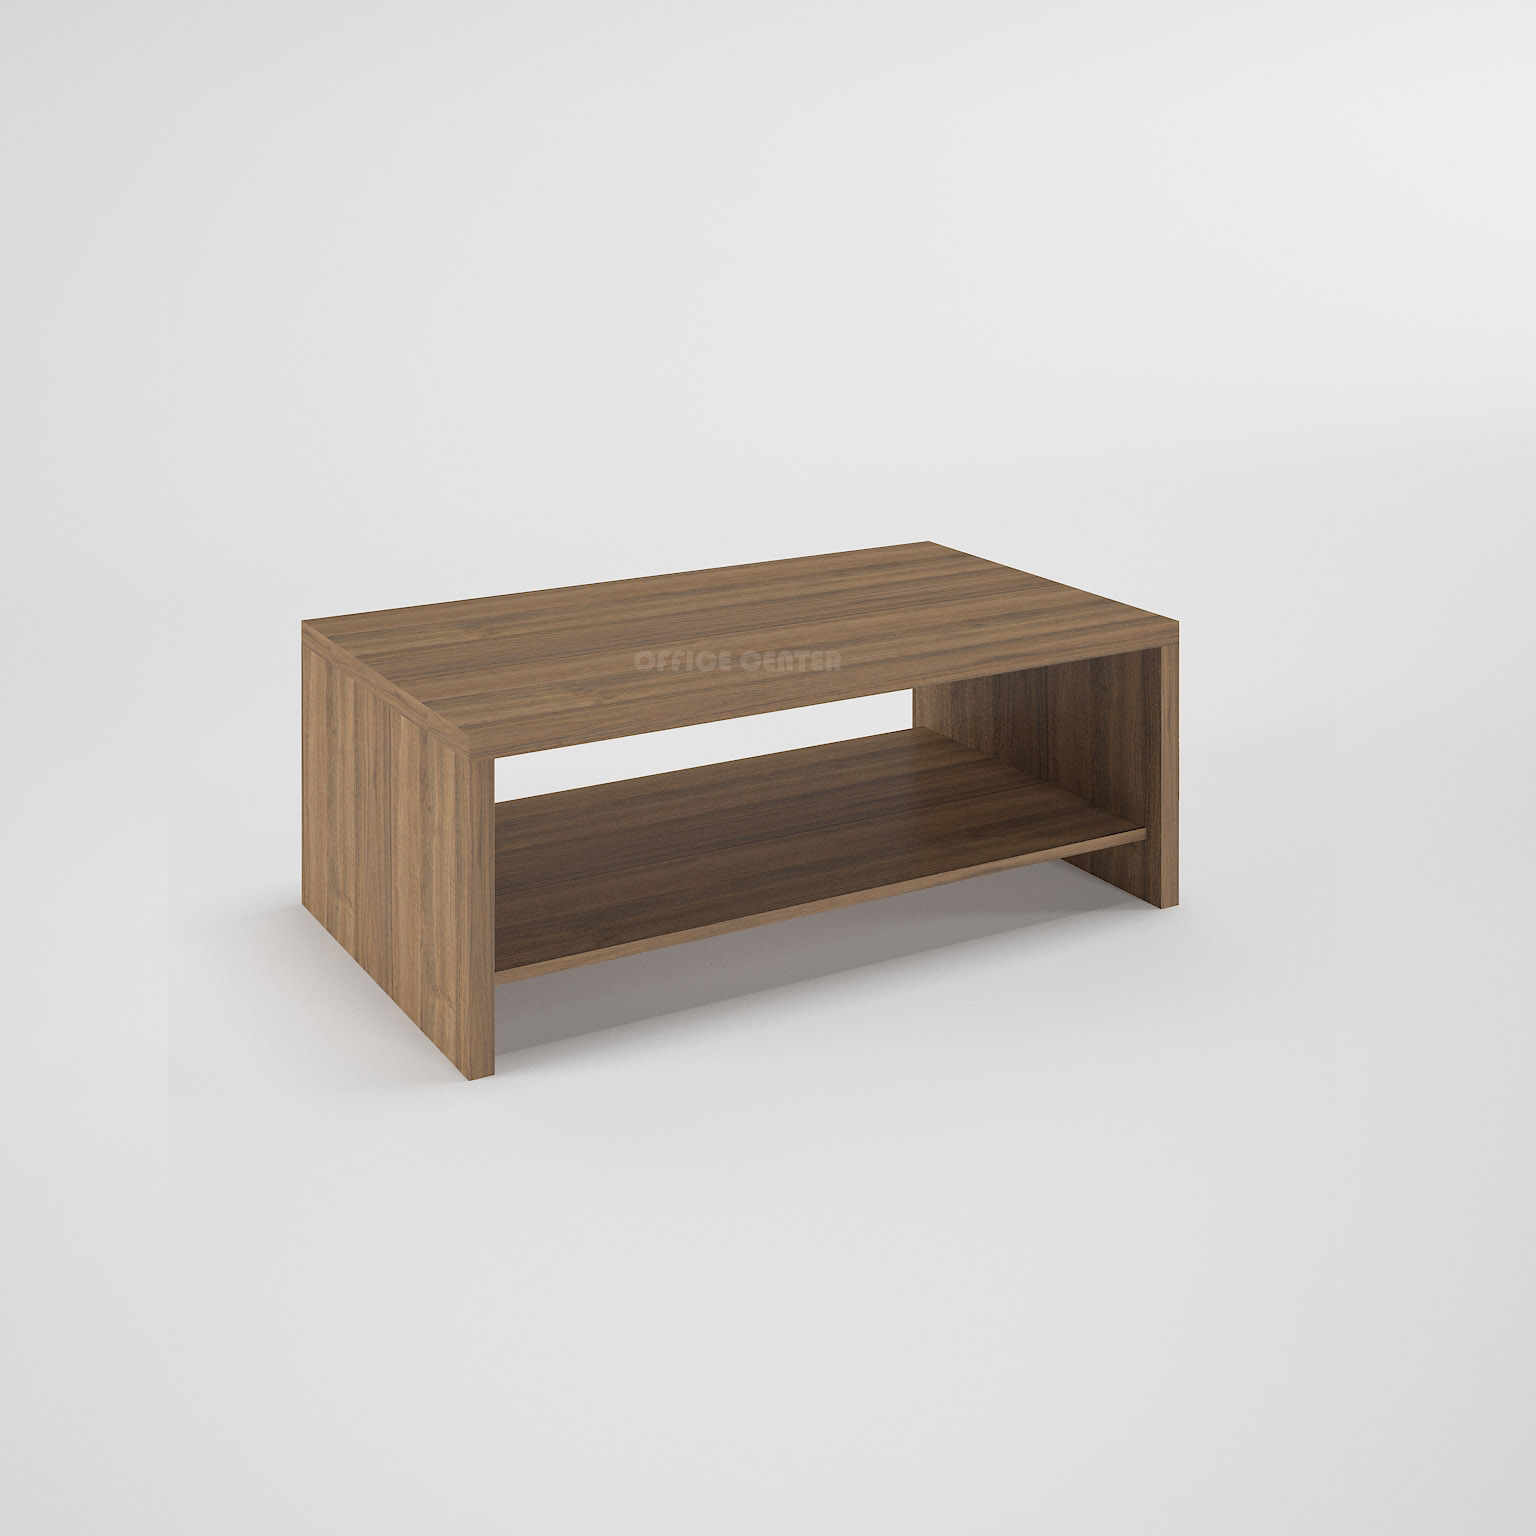 wooden-coffee-table